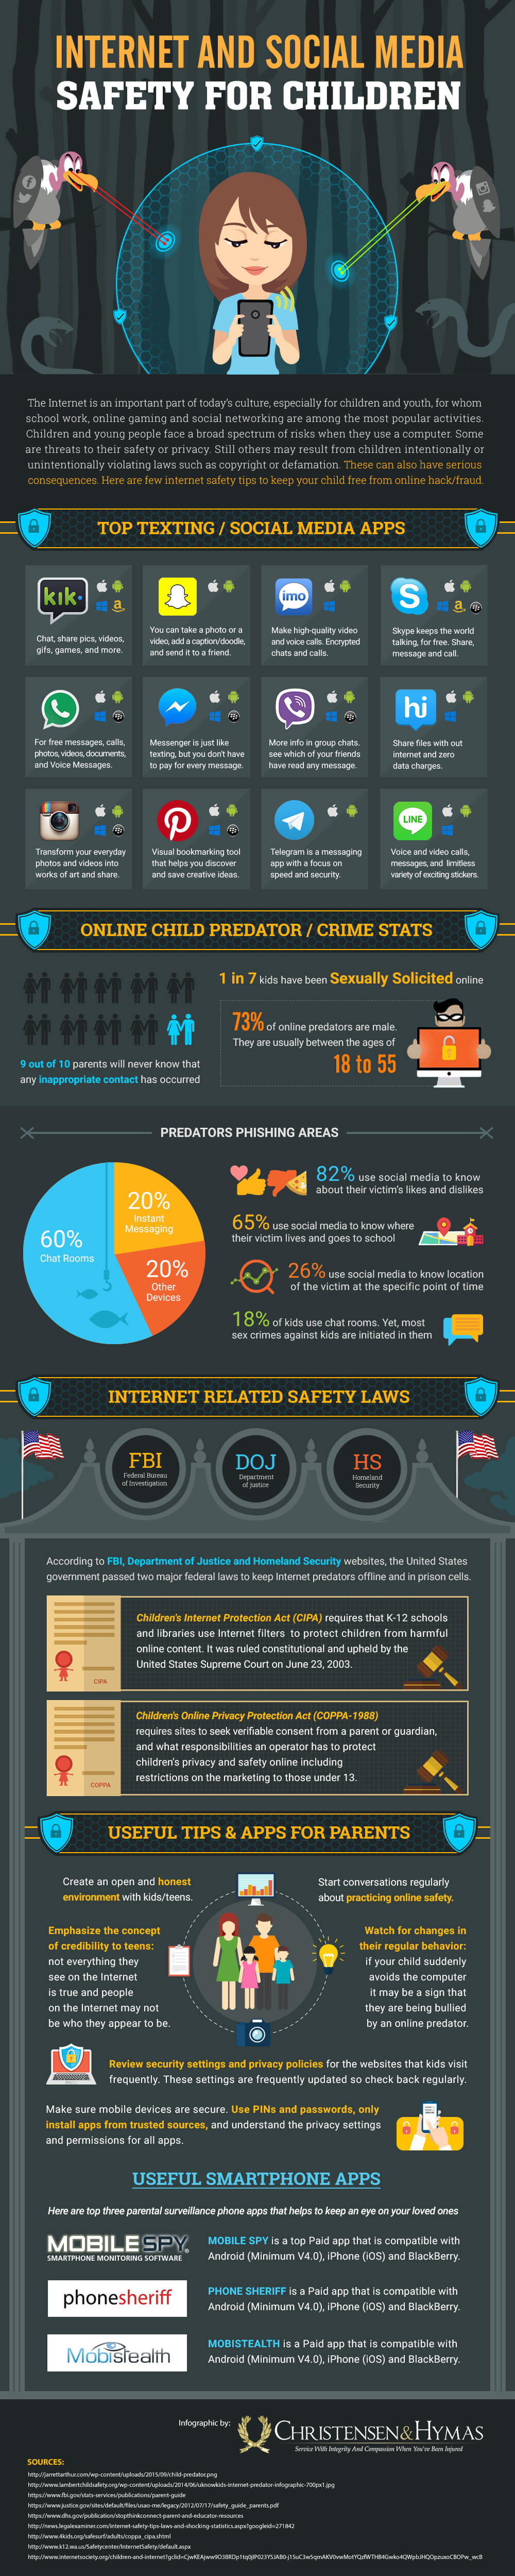 Internet and Social Media Safety for Child Infographic